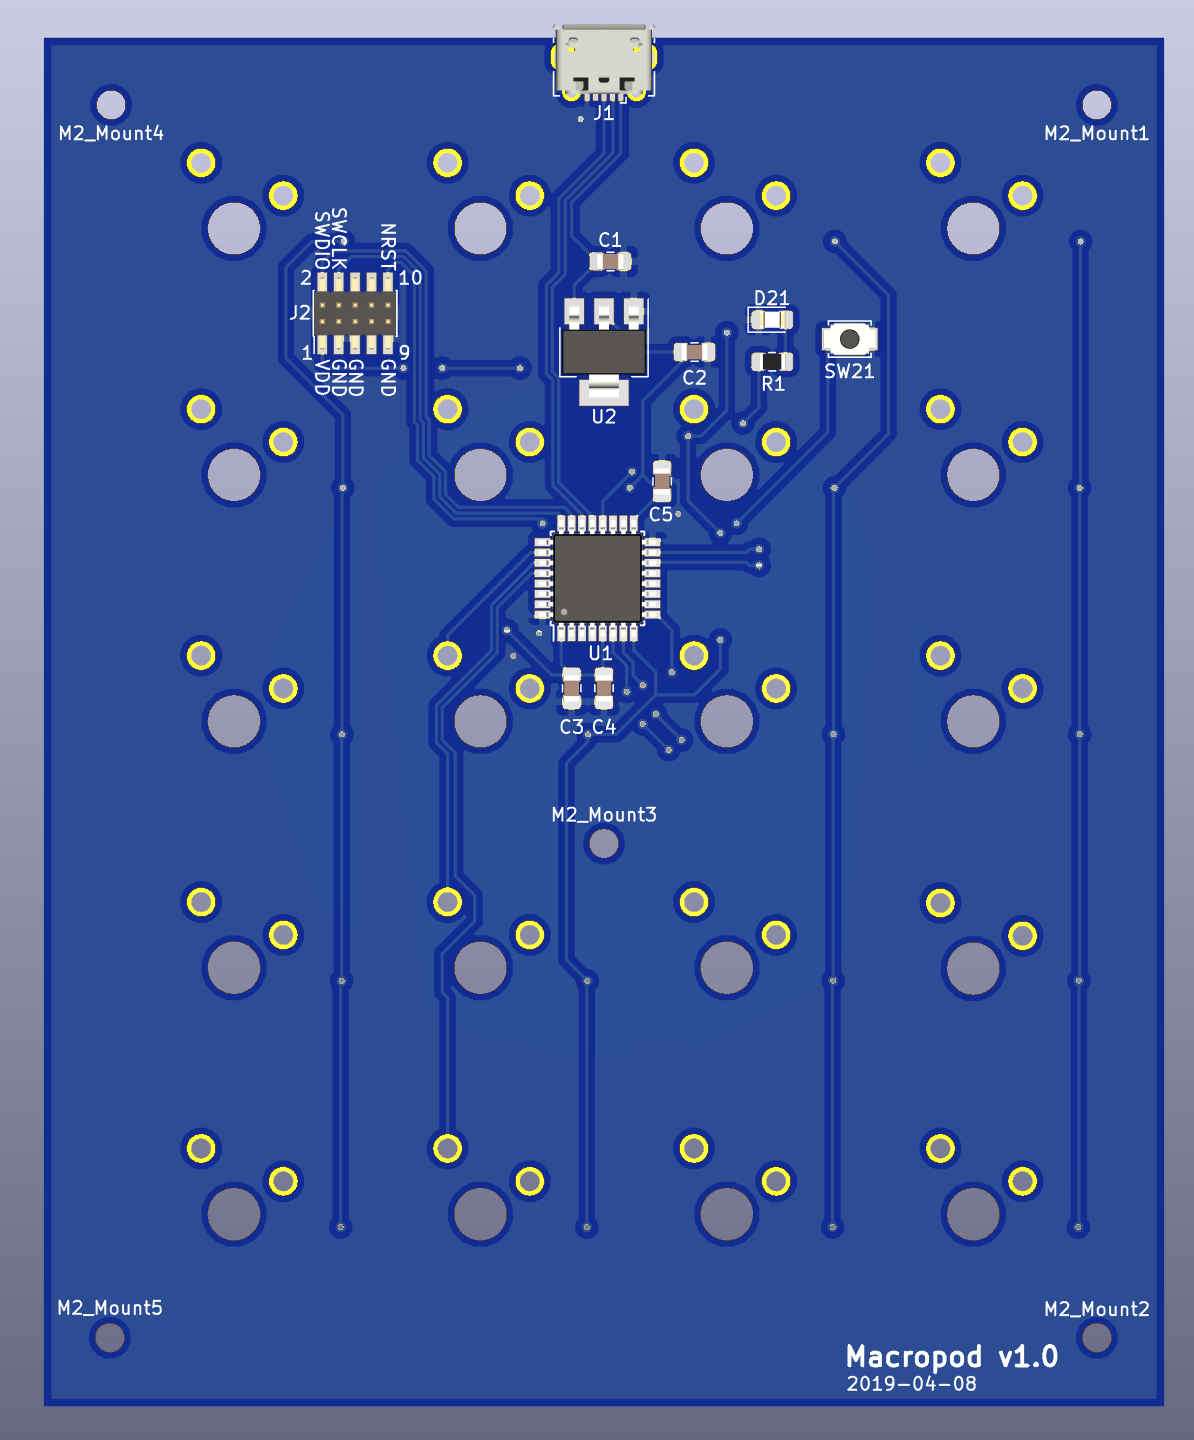 The back of the PCB